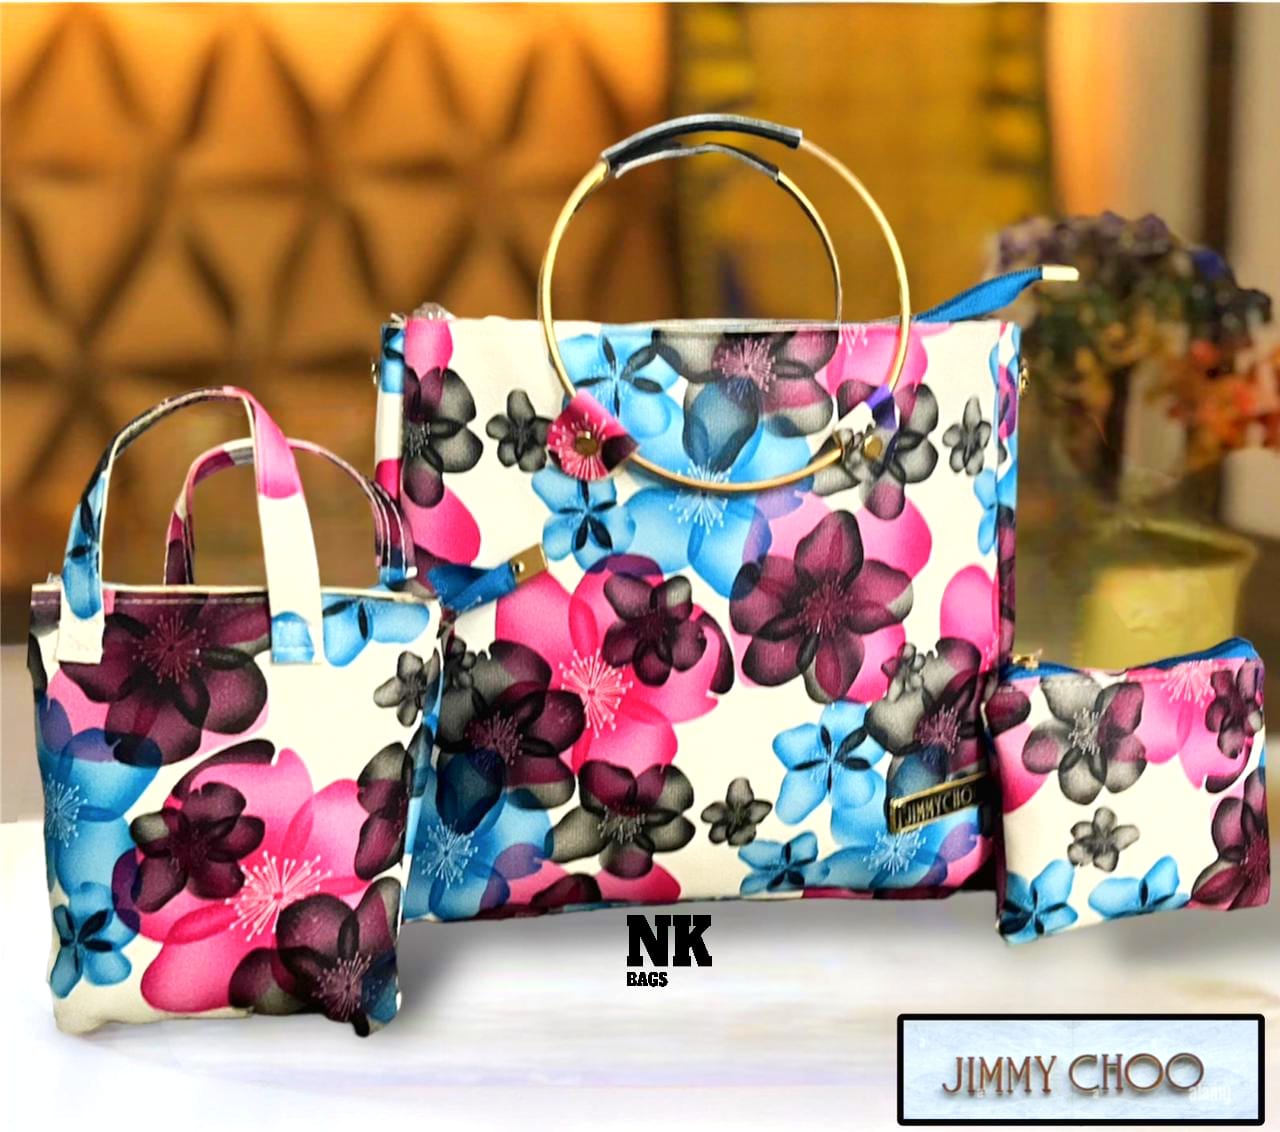 1030A. JIMMY CHOO purse, 3 pc combo, Round steel dual handle, flowery printed. Size